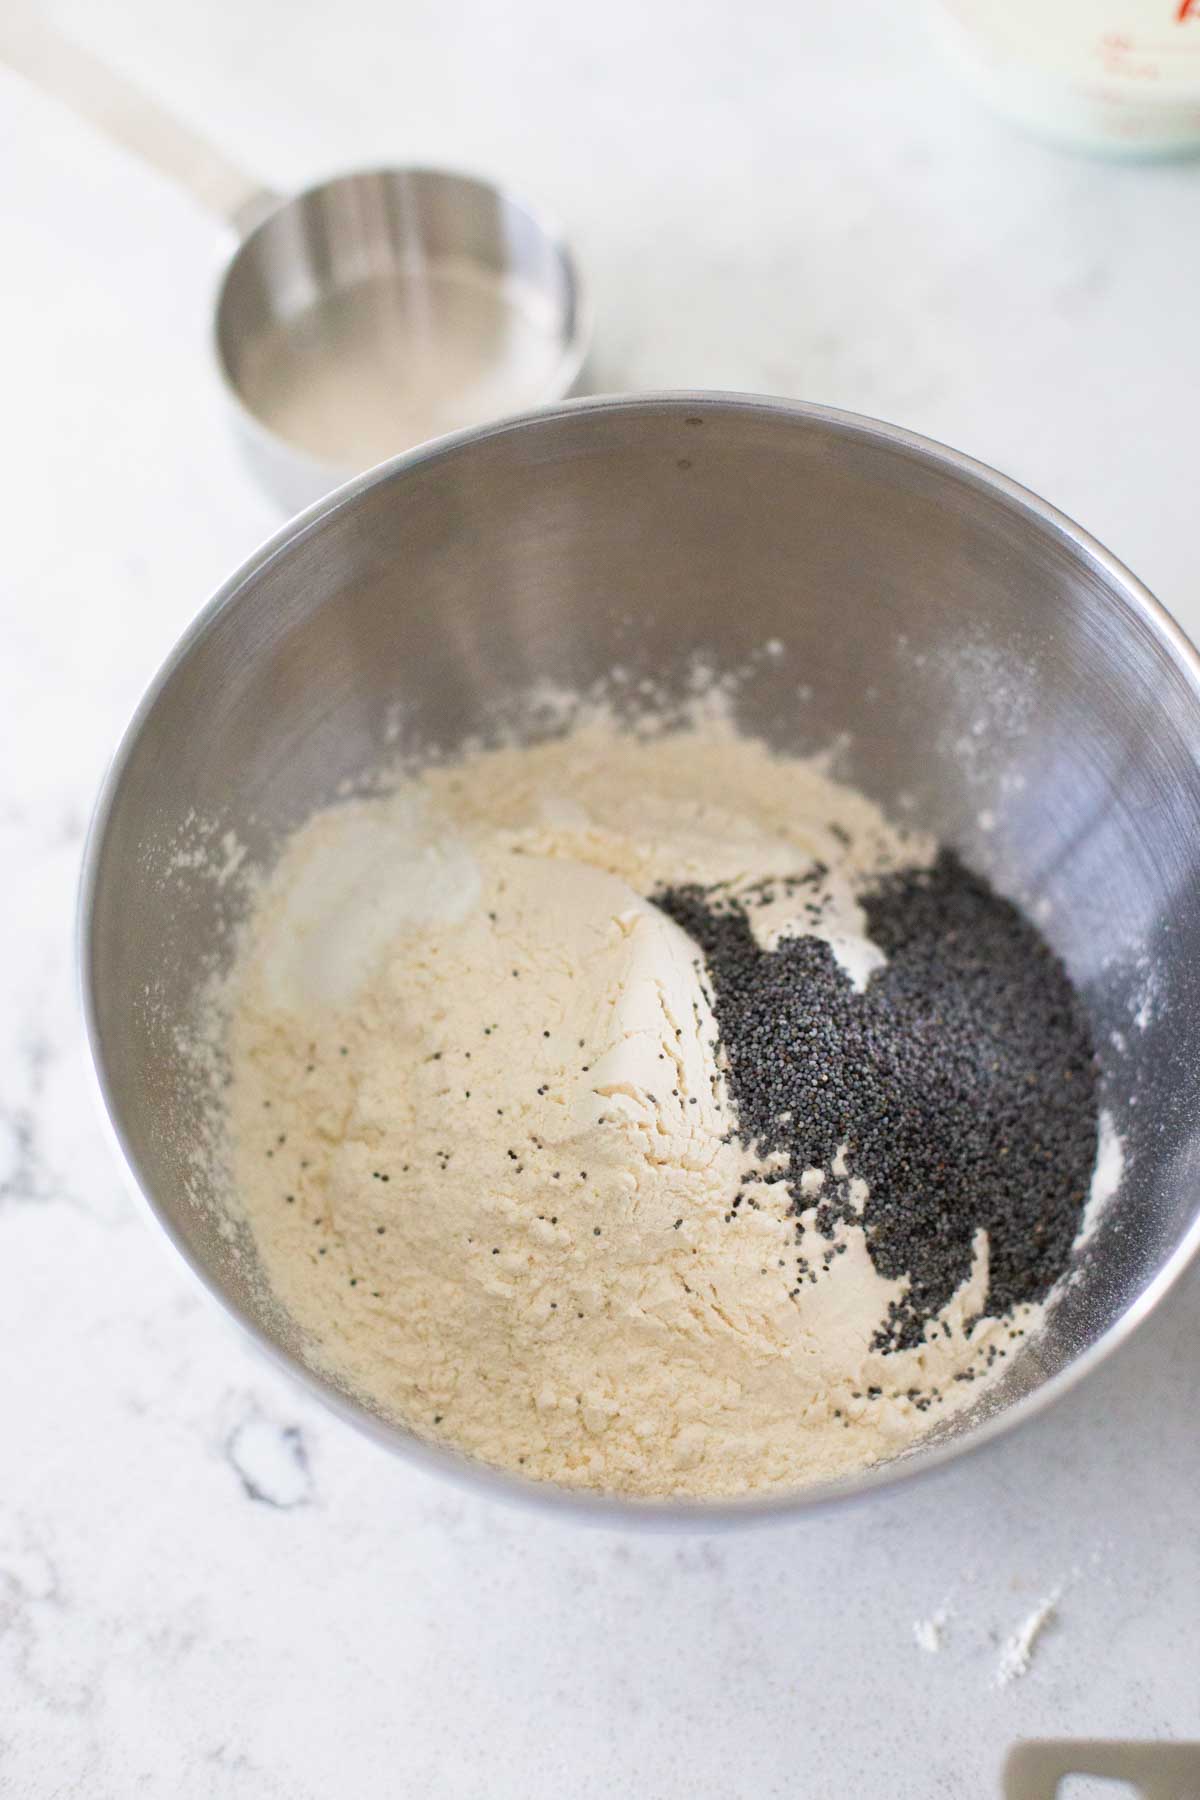 Mix the poppy seeds with the dry ingredients first.